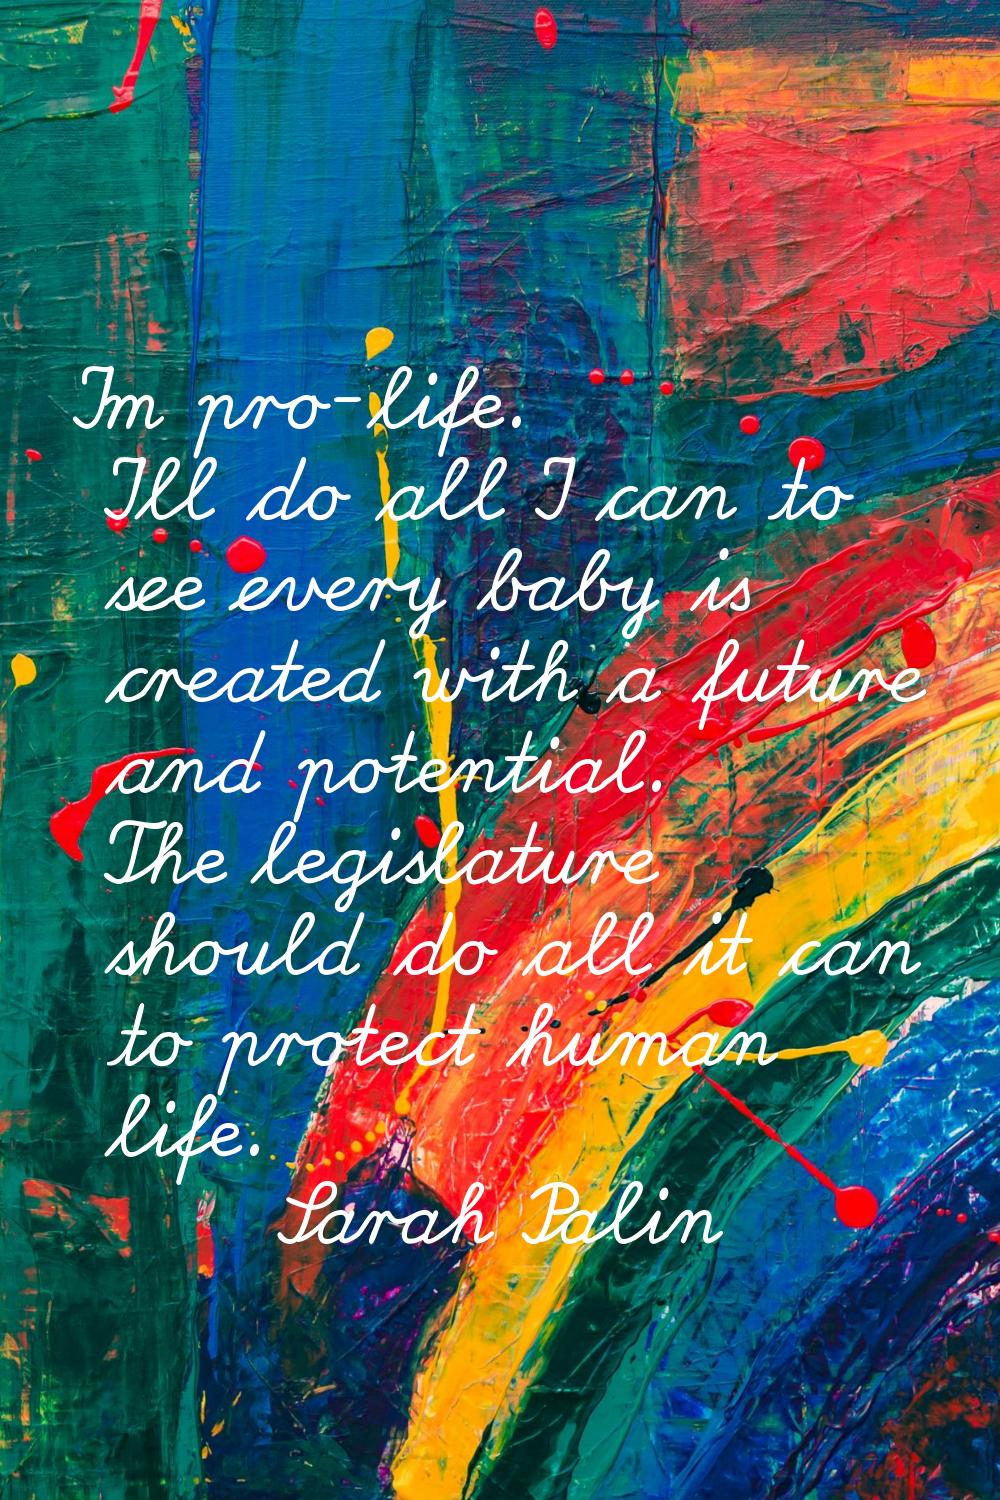 I'm pro-life. I'll do all I can to see every baby is created with a future and potential. The legis